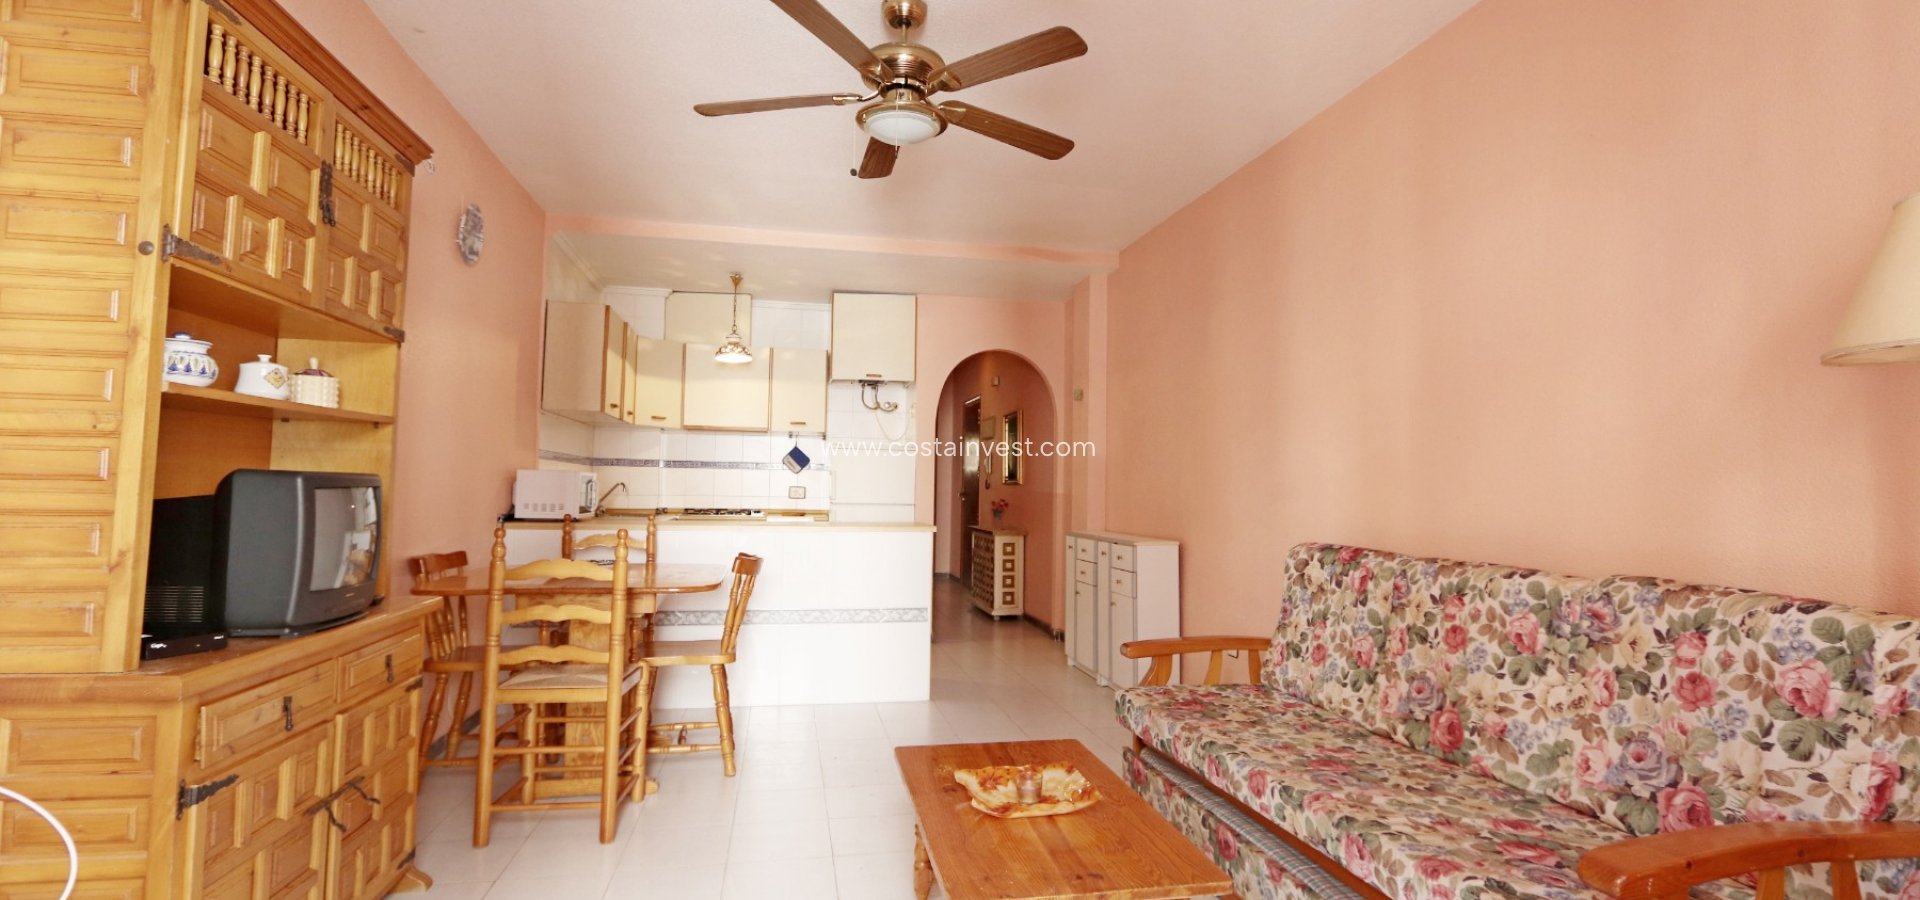 Apartment For Sale in Torrevieja -  Los Locos beach - Kitchen